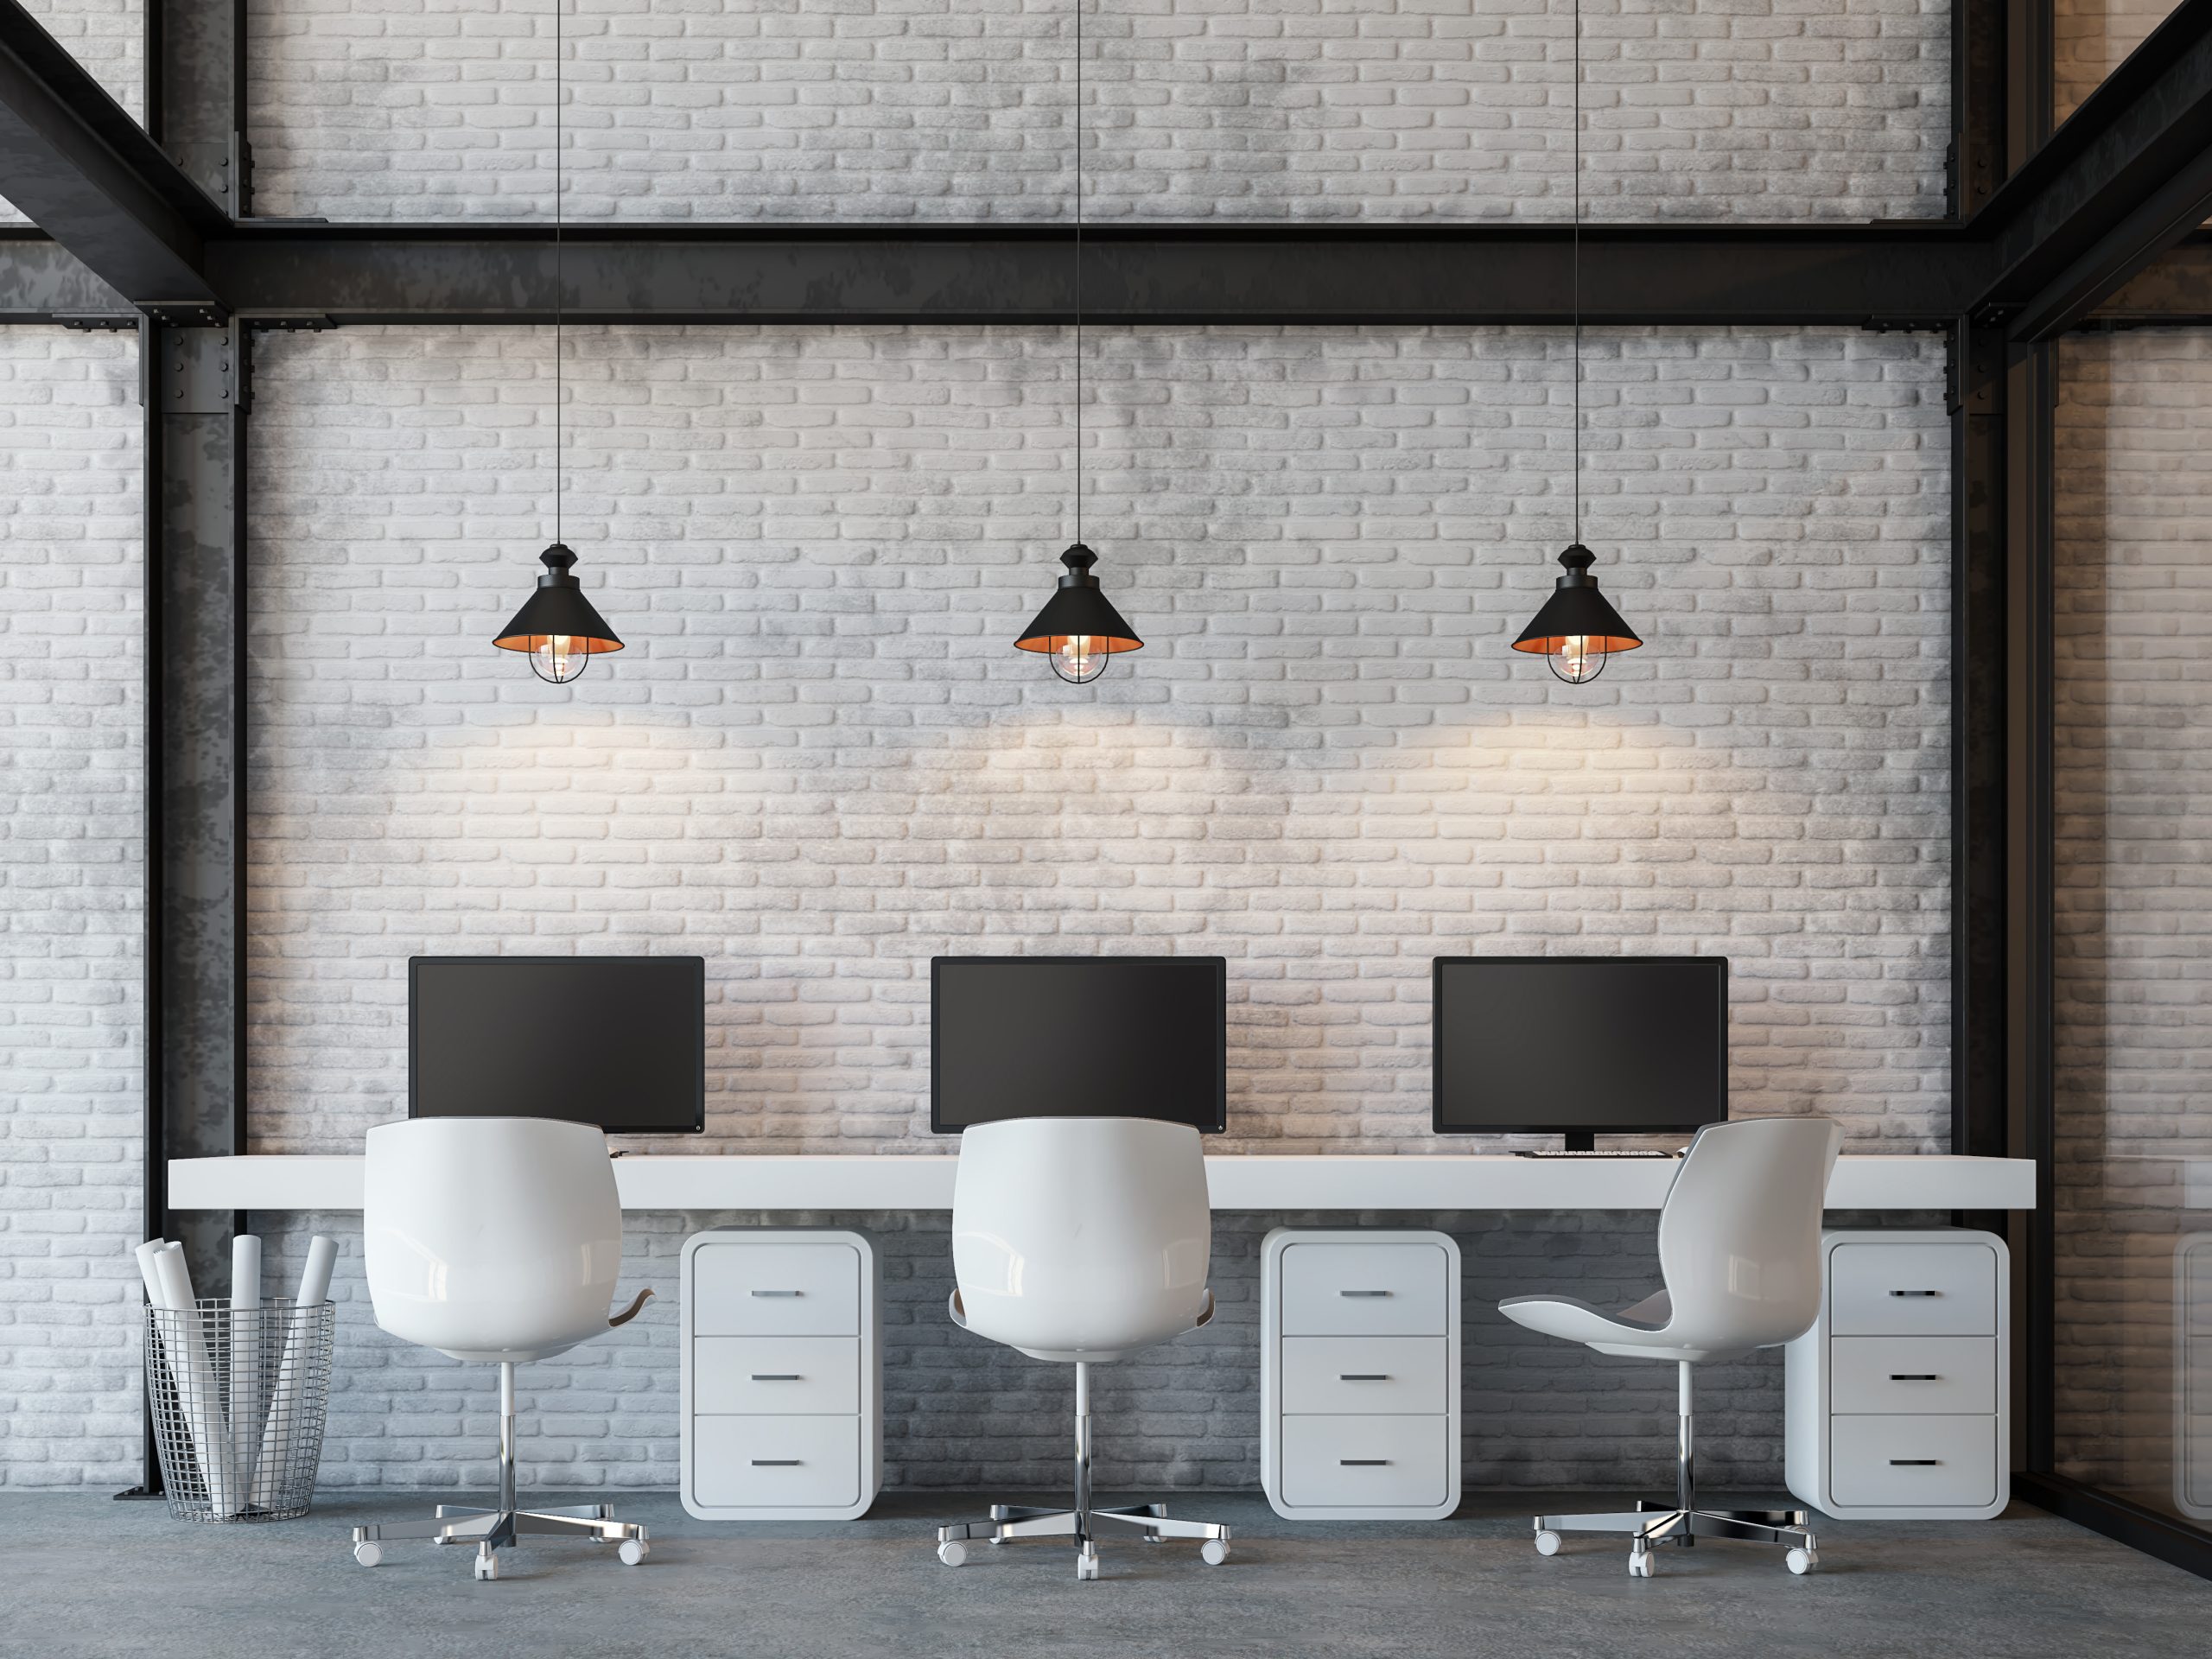 Loft style office 3d rendering image.There are white brick wall,